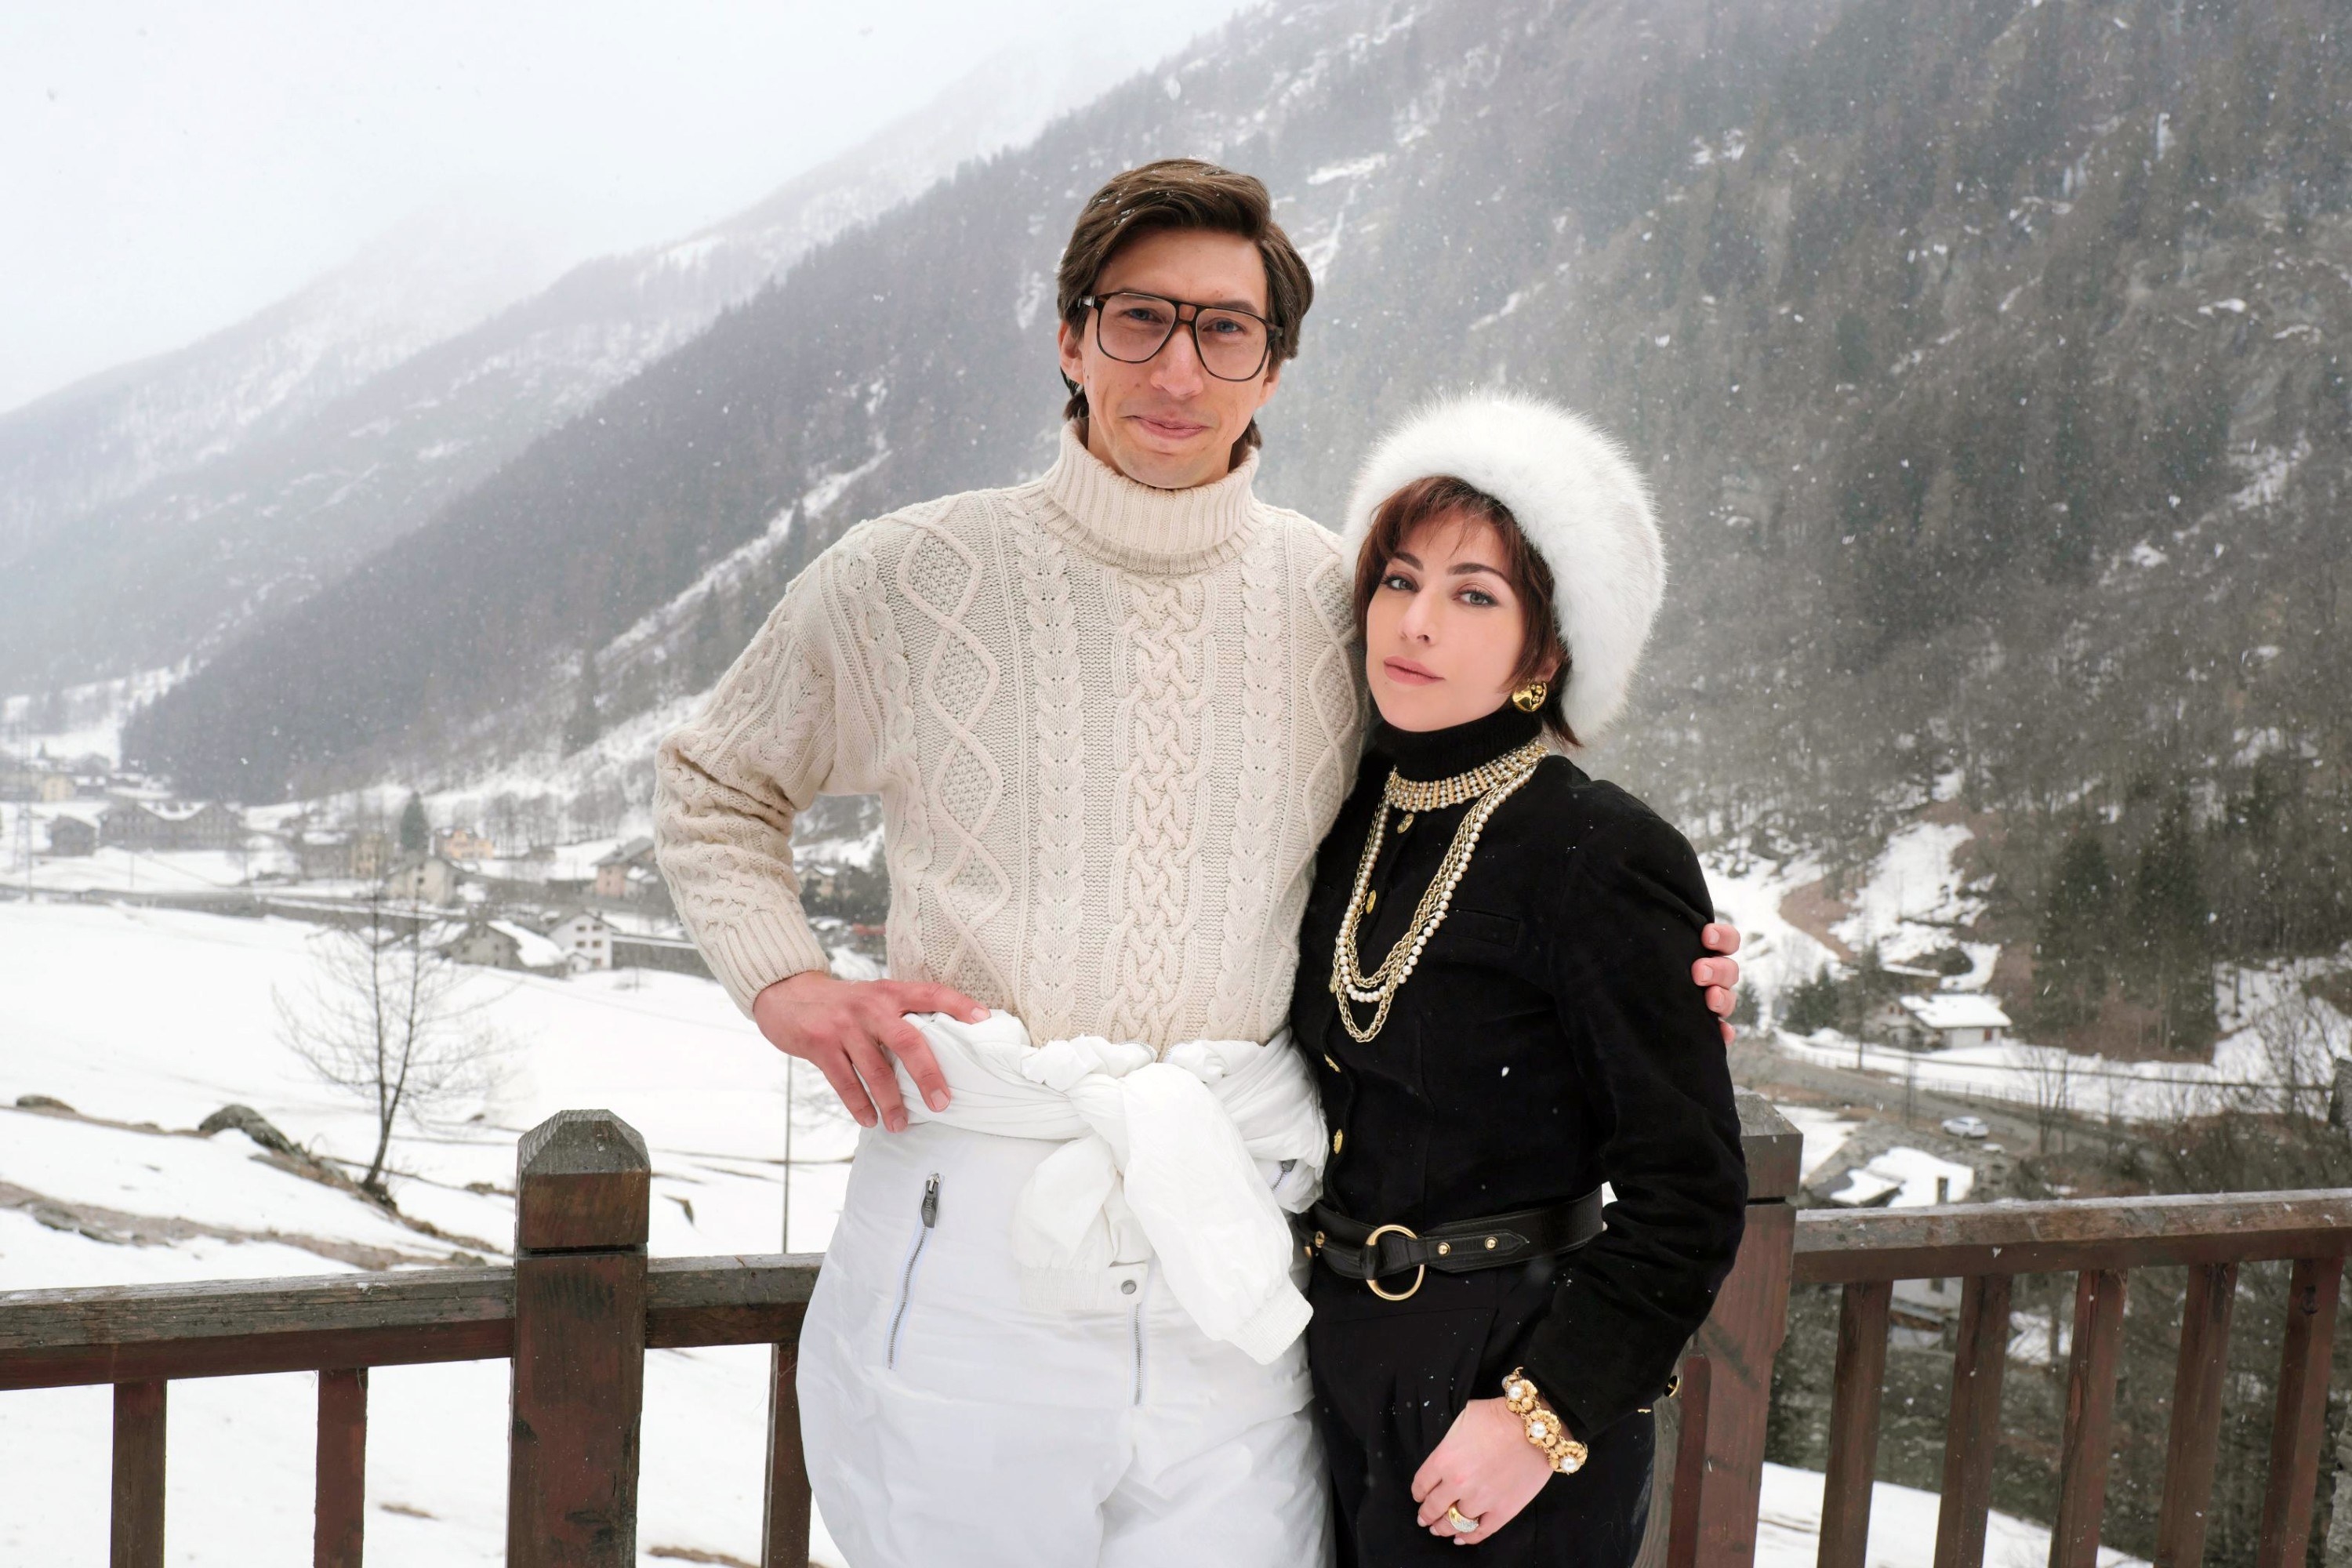 Gaga stands with Adam Driver in front of a snowy mountain in the movie